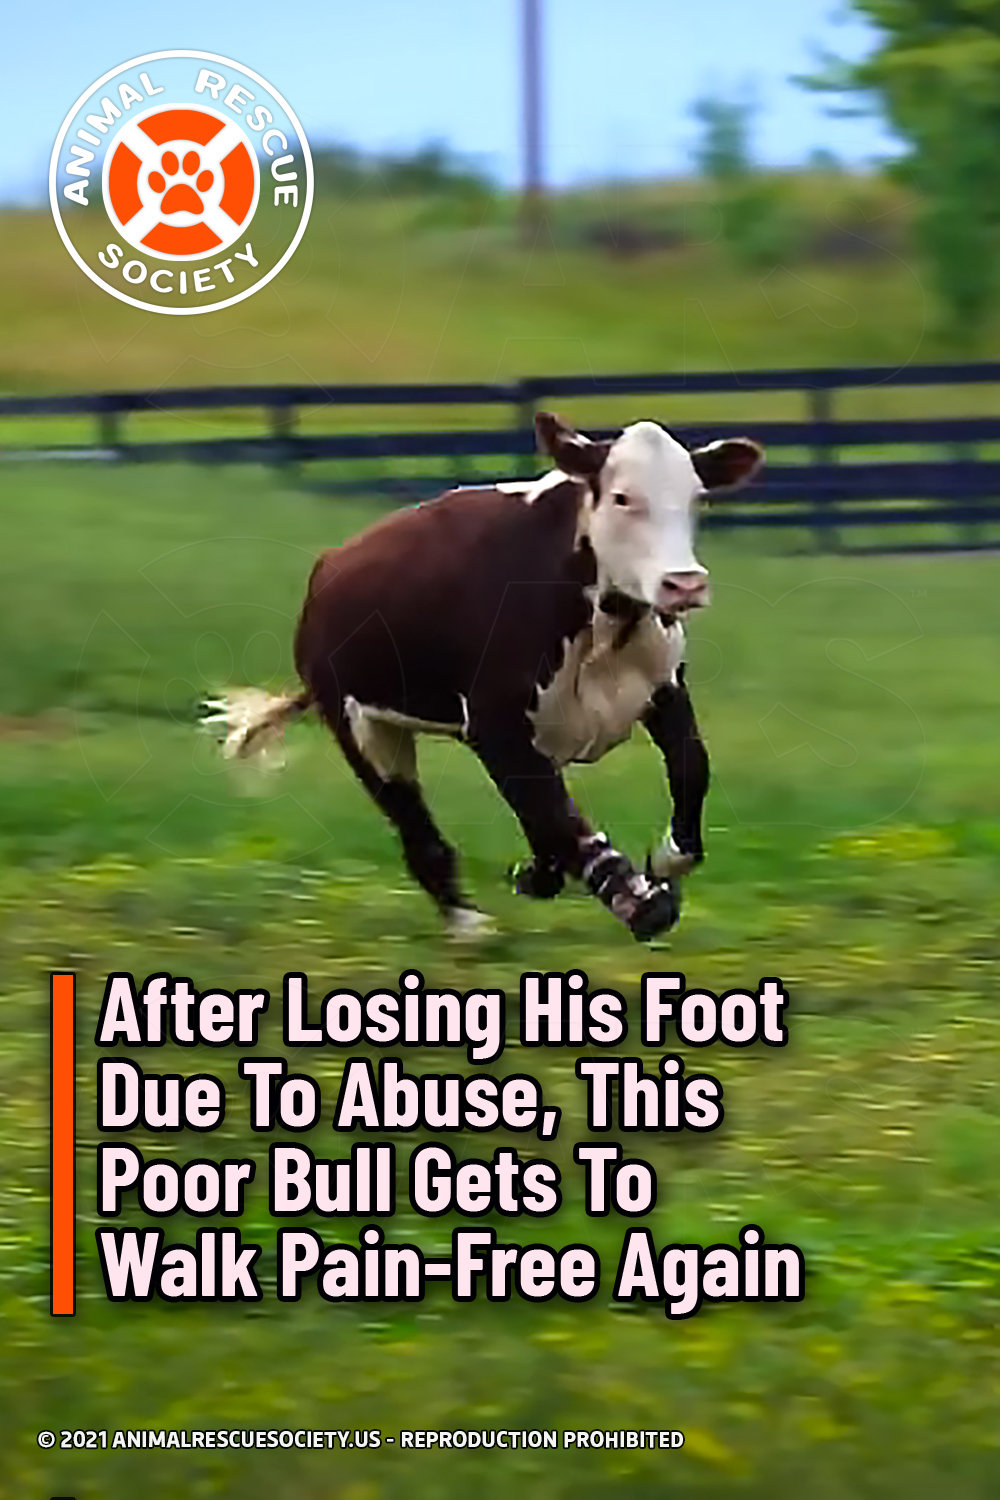 After Losing His Foot Due To Abuse, This Poor Bull Gets To Walk Pain-Free Again